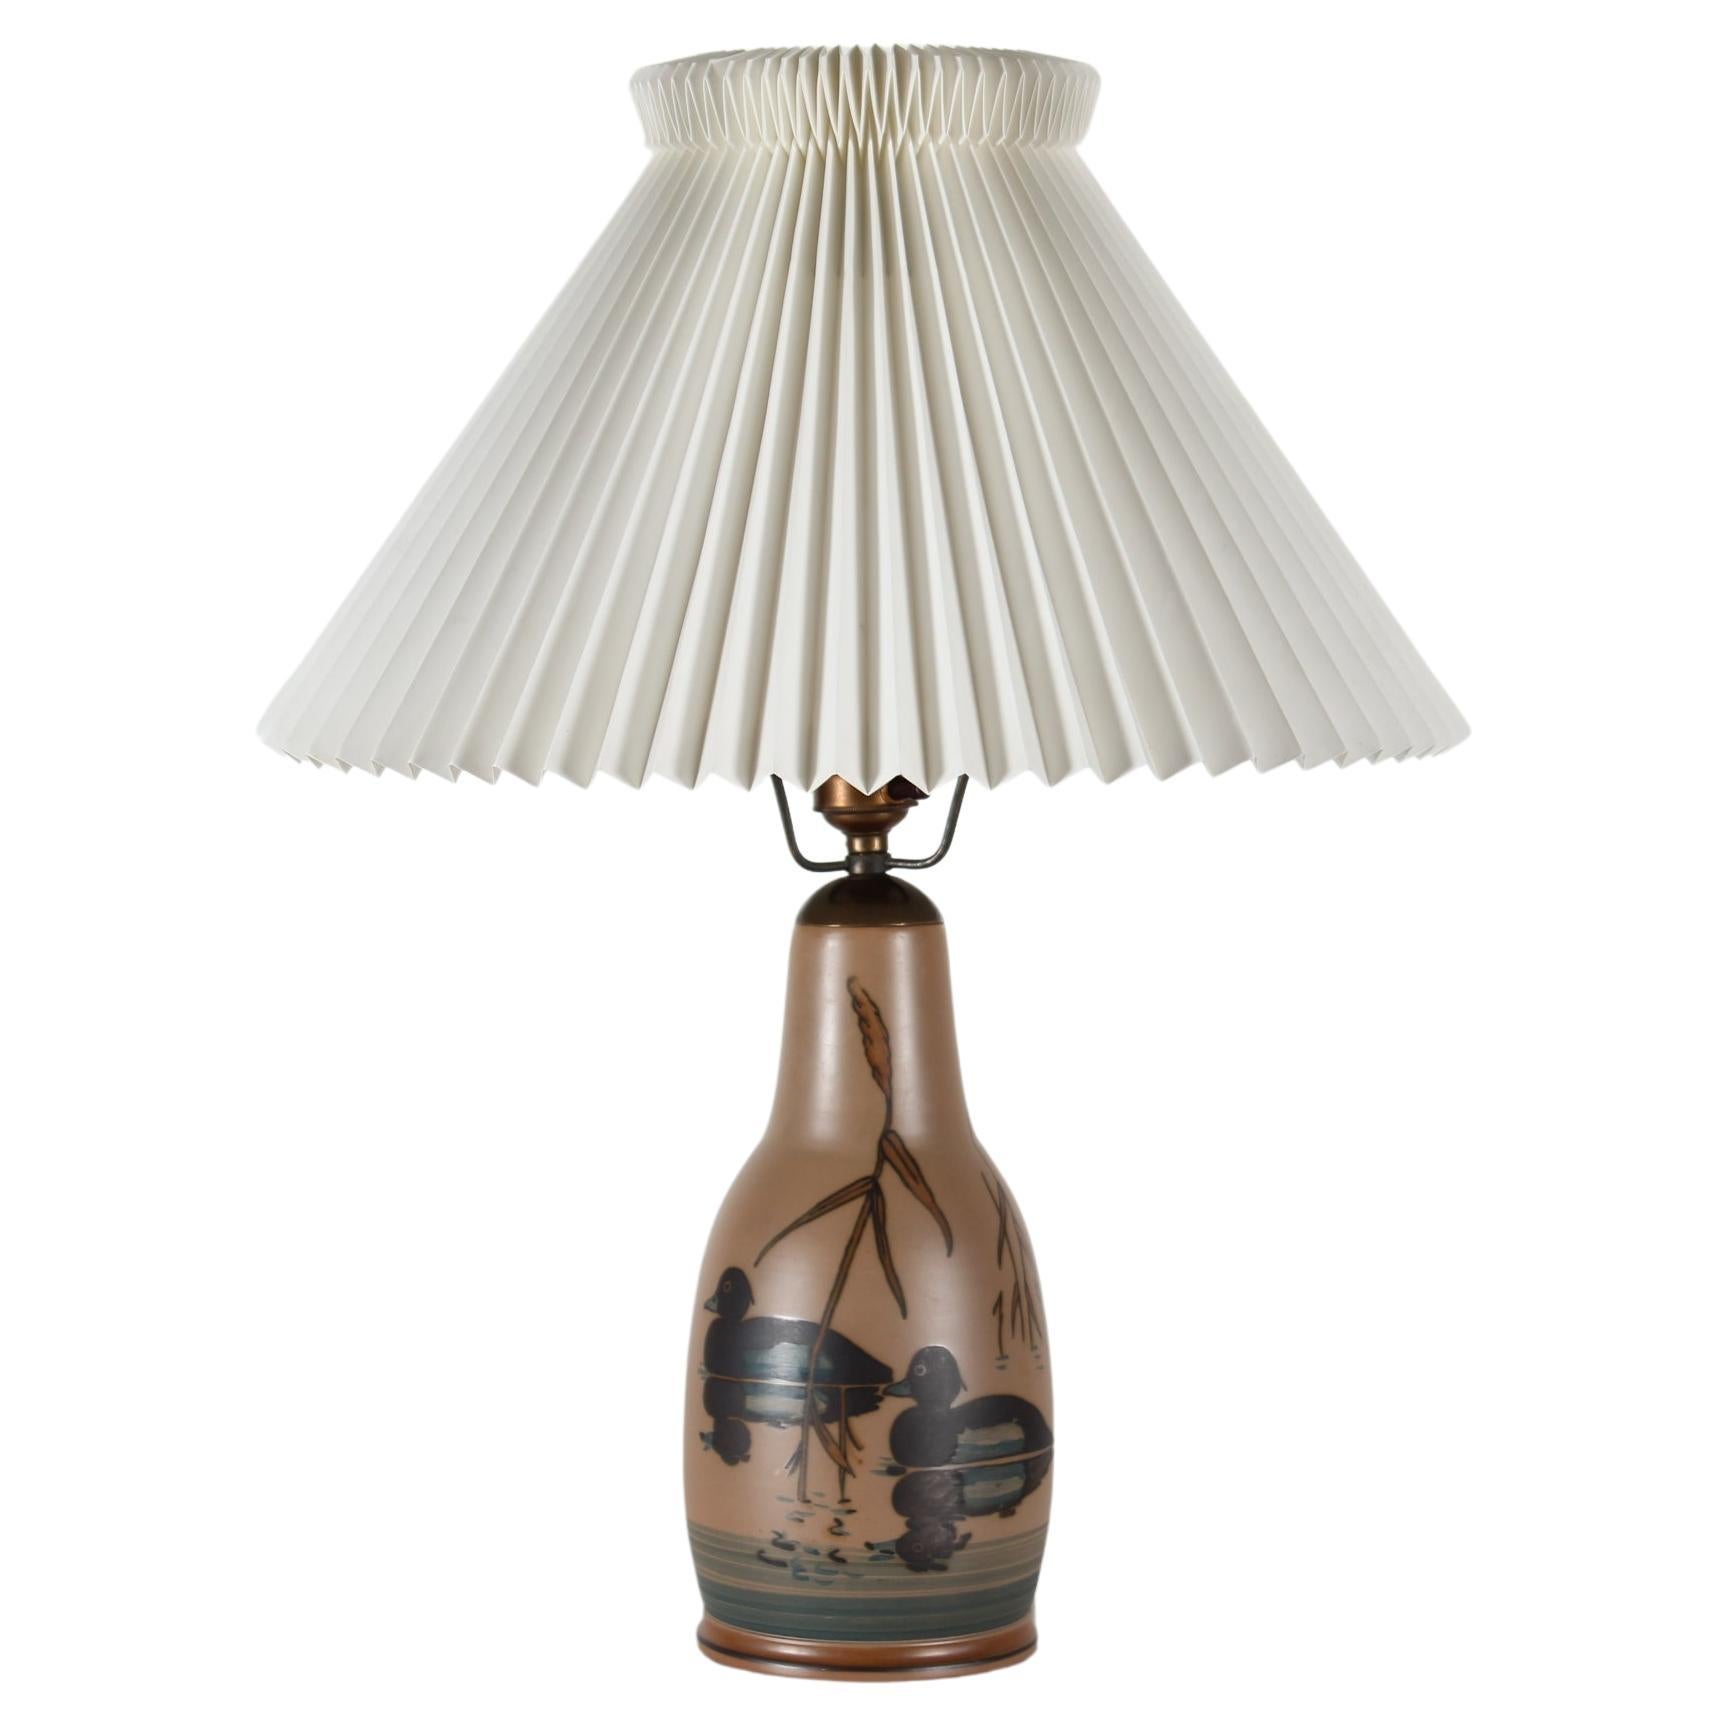 Danish Art Deco Table Lamp by L. Hjorth Ceramic, with Swimming Ducks + Le Klint For Sale